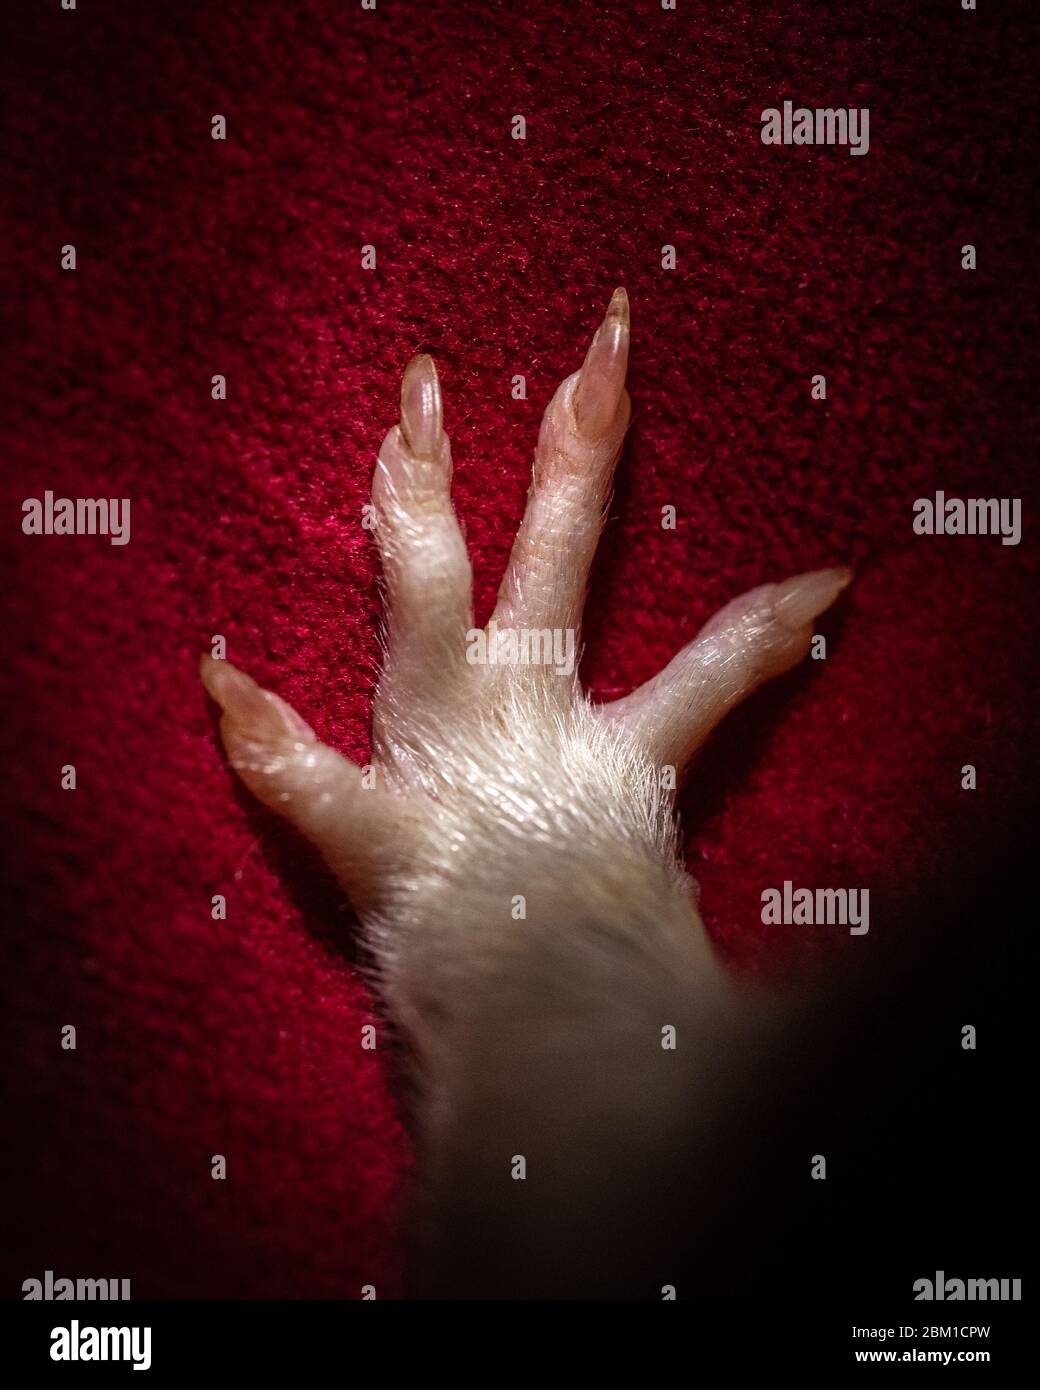 A close up photo of a rats foot on a  red cloth background, showing the splayed open fingers, complete with finger nails. Stock Photo